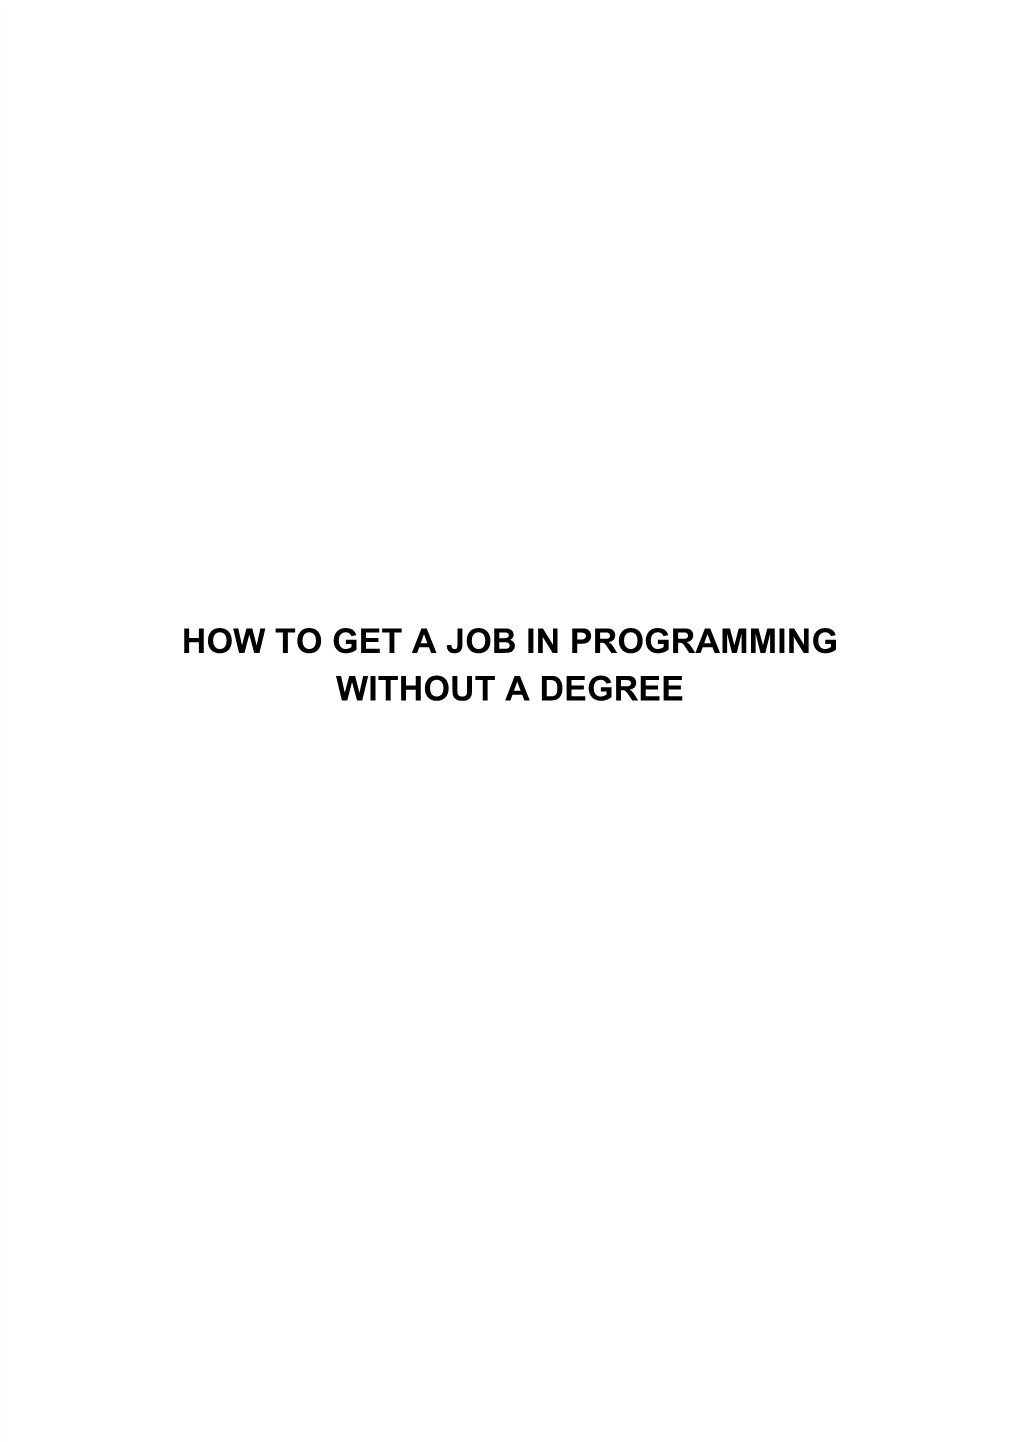 How to Get a Job in Programming Without a Degree